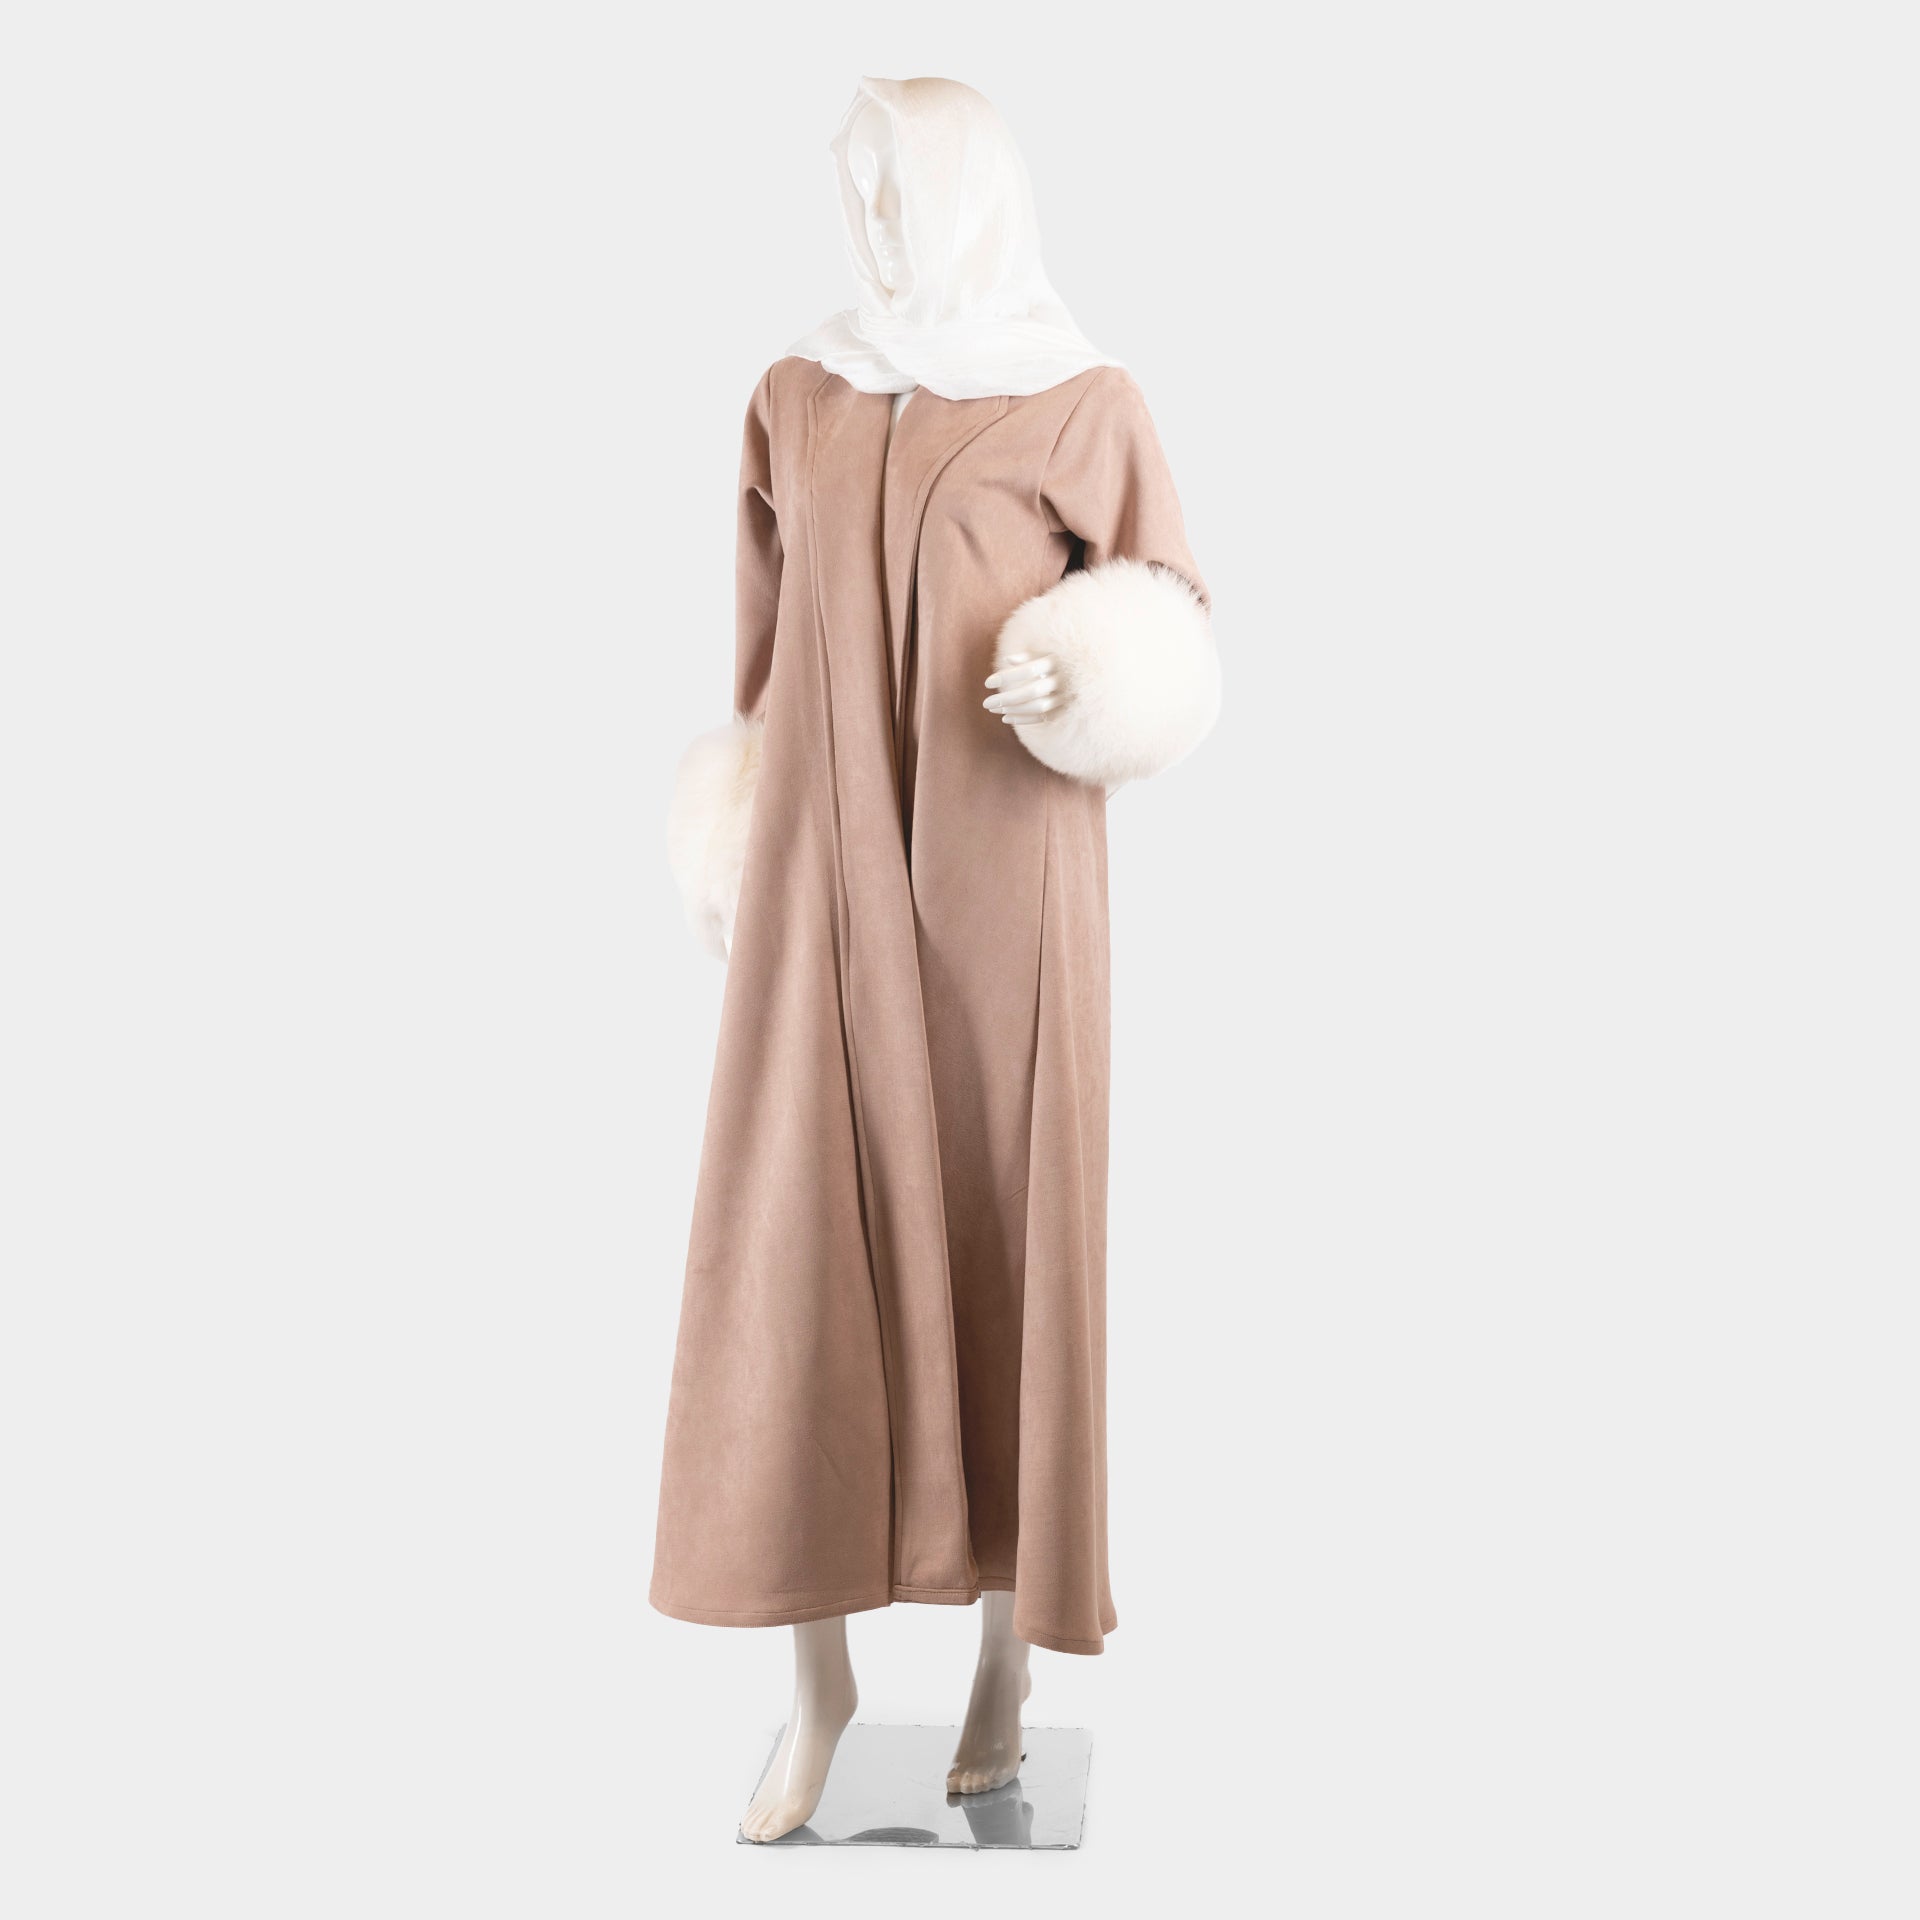 Beige Abaya With White Fur On the Sleeves End From Darzah